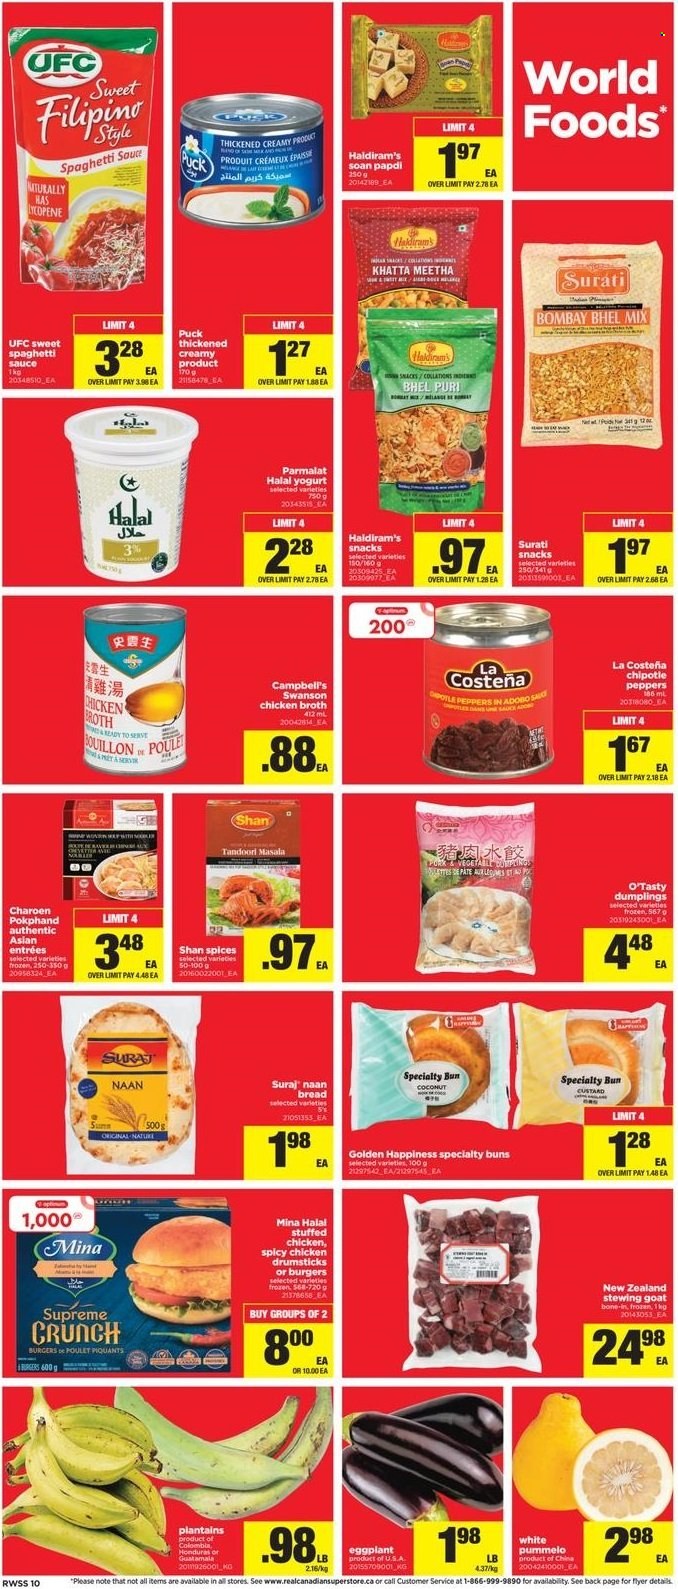 thumbnail - Real Canadian Superstore Flyer - October 22, 2021 - October 28, 2021 - Sales products - bread, buns, peppers, eggplant, plantains, Campbell's, spaghetti, sauce, dumplings, stuffed chicken, Puck, custard, yoghurt, Parmalat, snack, chicken broth, broth, adobo sauce, chicken drumsticks, chicken. Page 10.